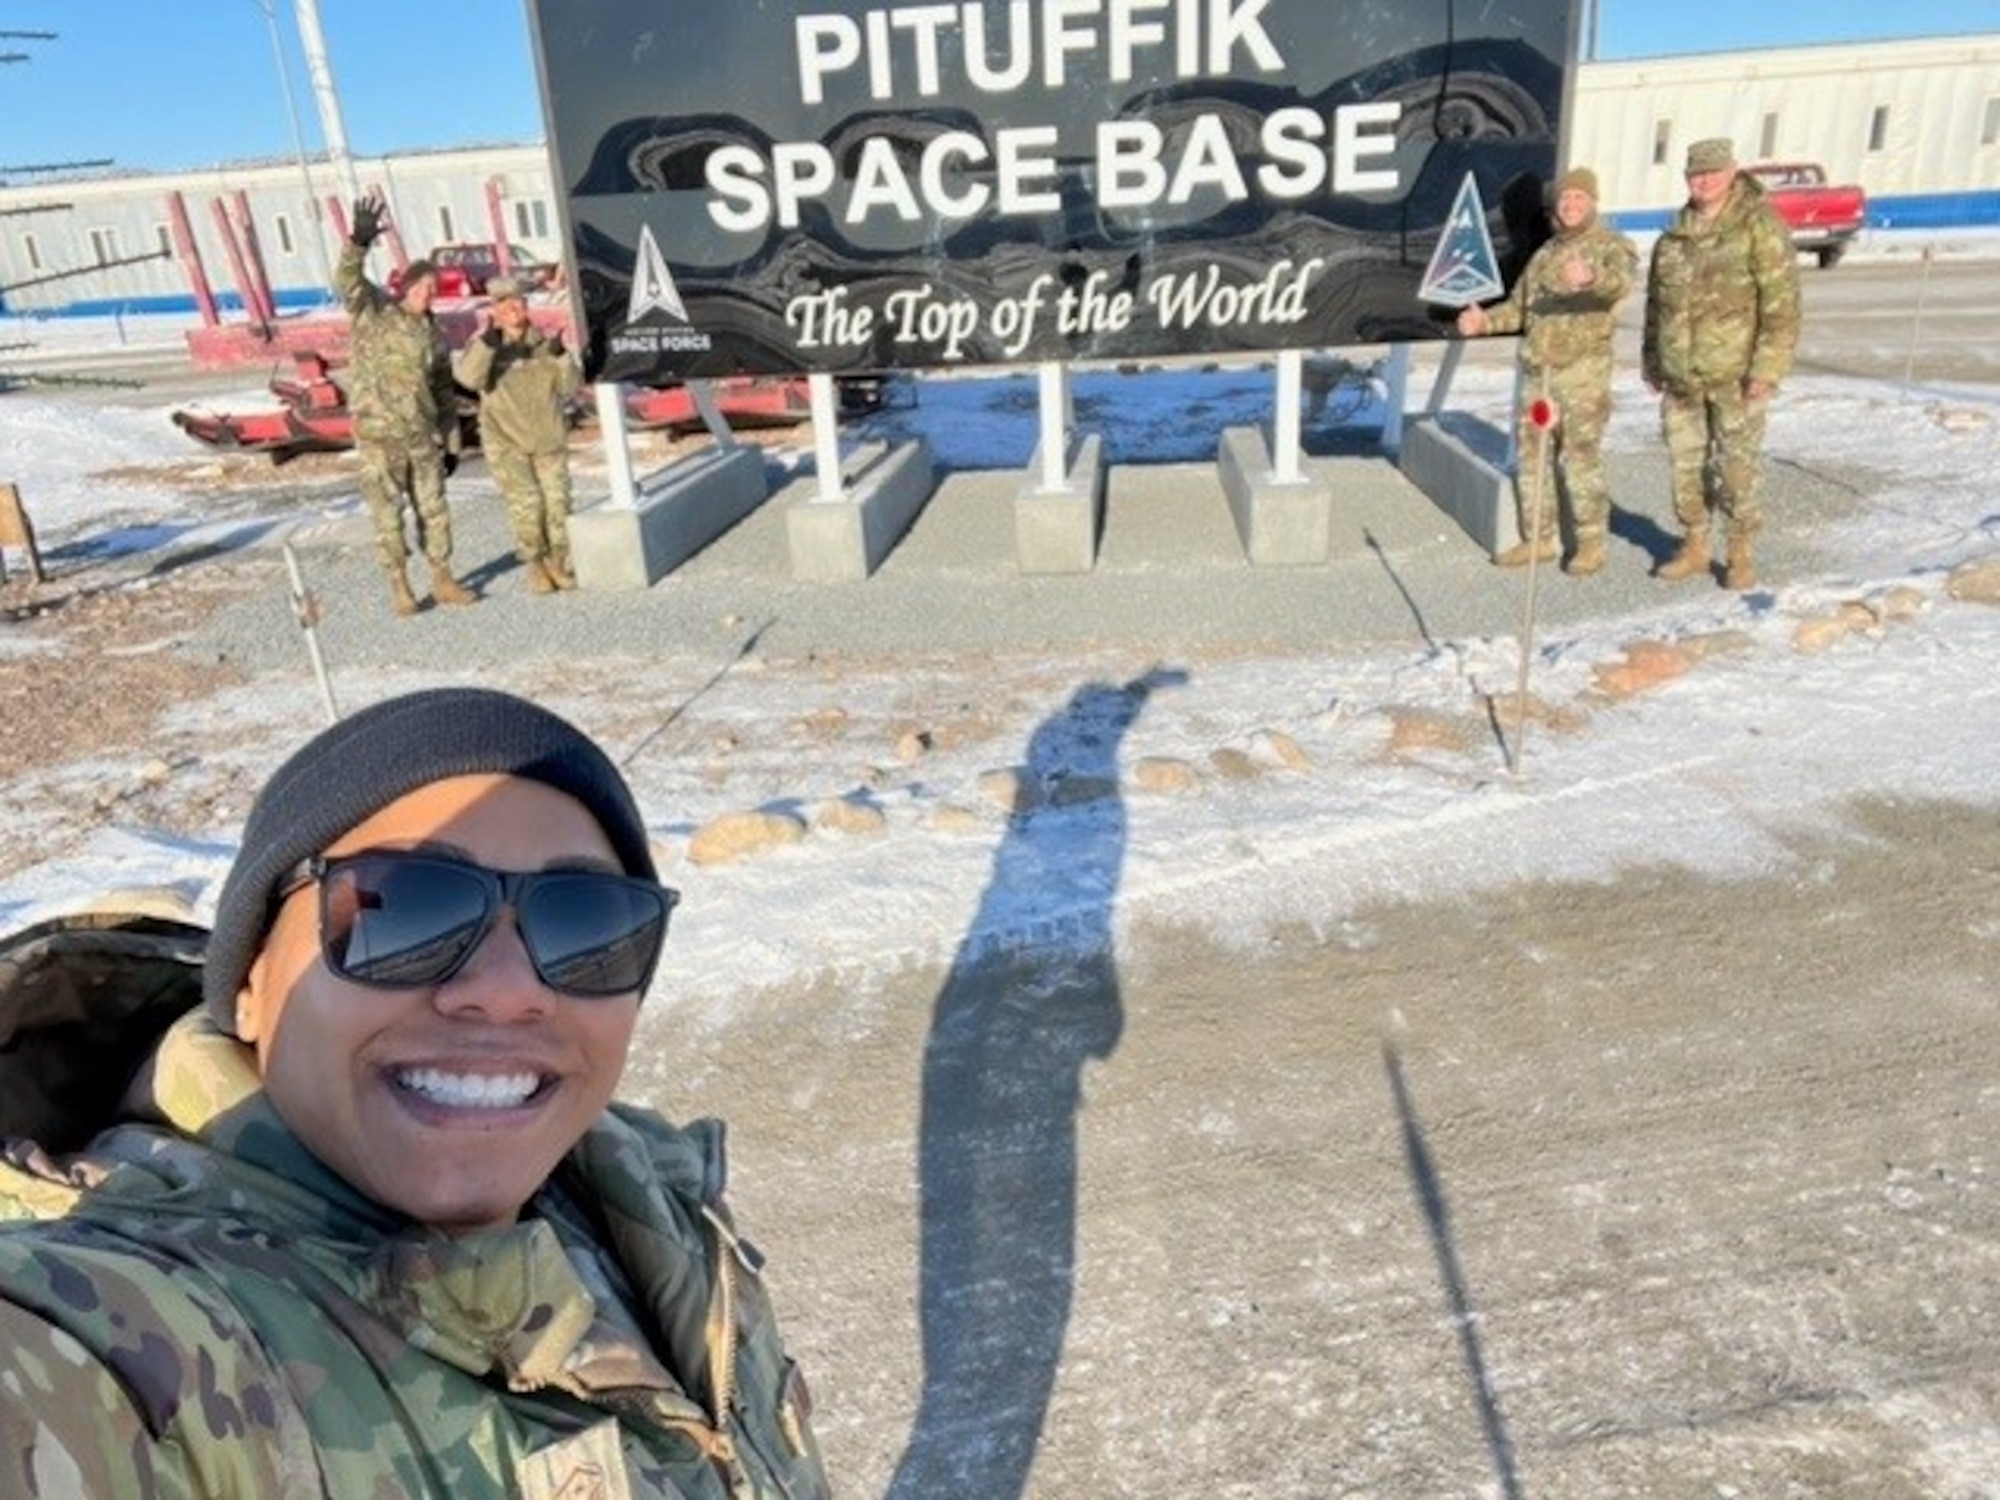 Chief Master Sgt. Sevin Balkuvvar poses for photo with command teammates at Pituffik Space Base.